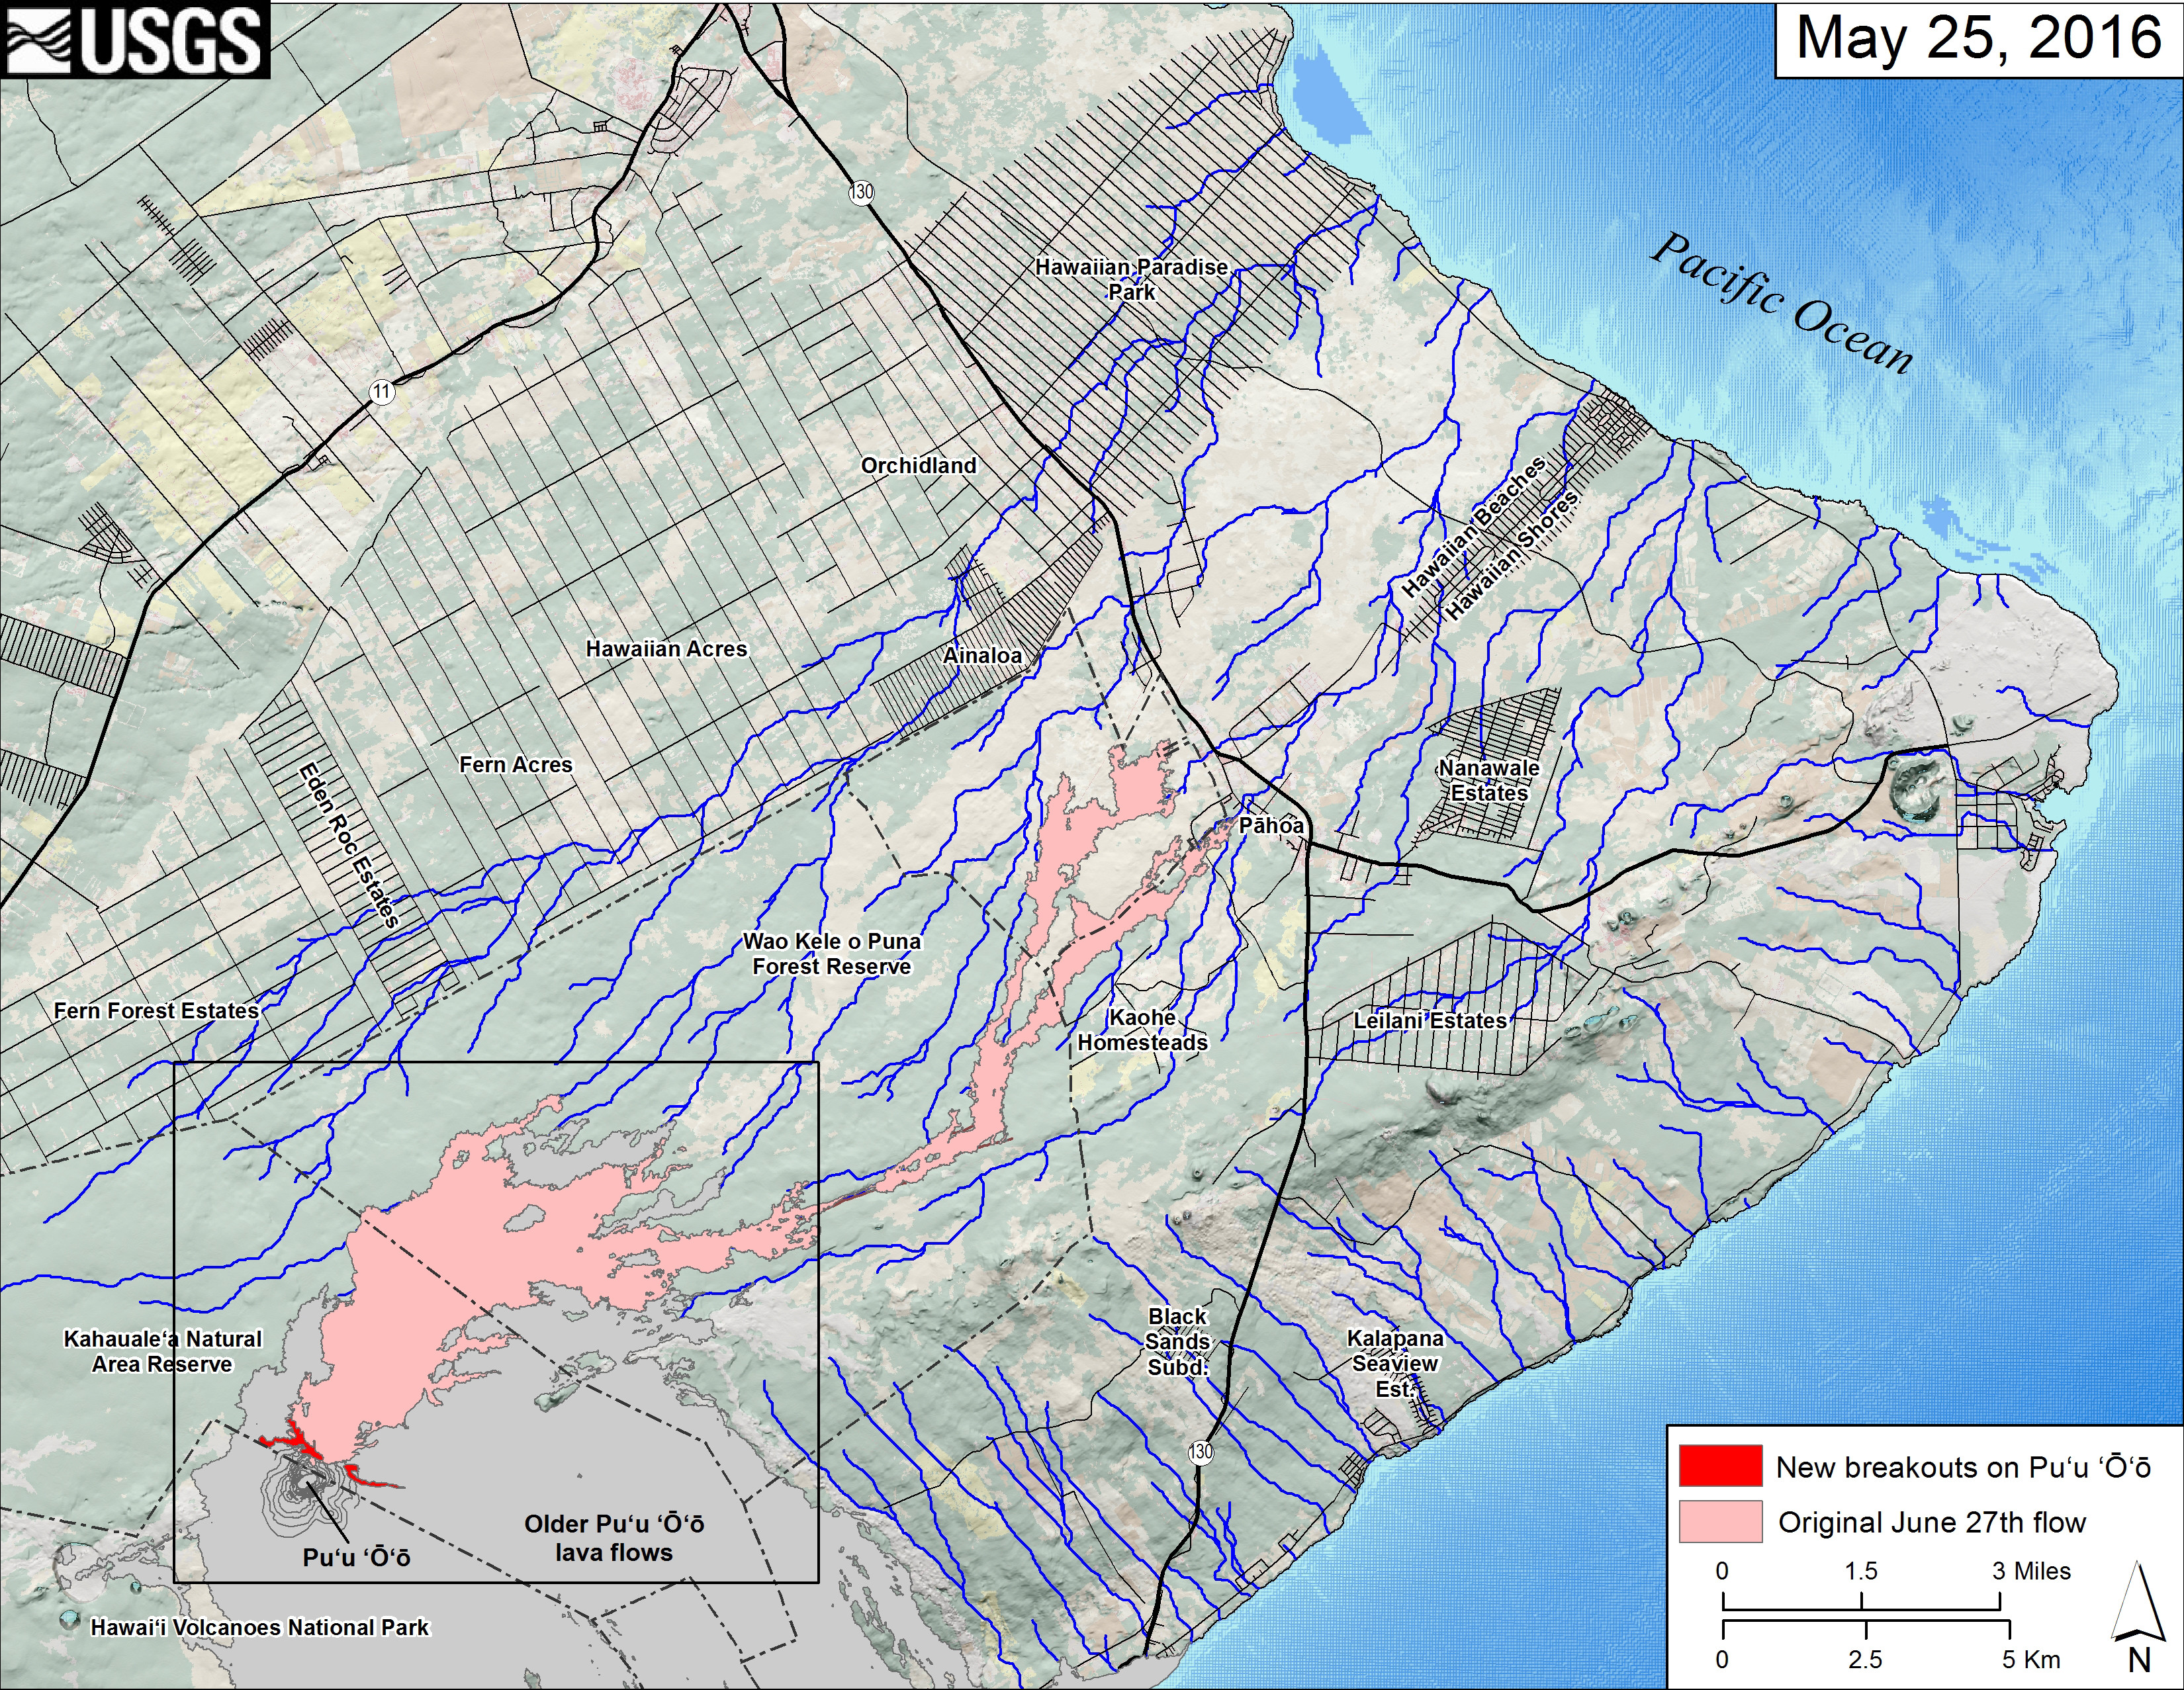 This small-scale USGS map shows Kīlauea’s active East Rift Zone lava flow field in relation to the eastern part of the Island of Hawaiʻi. USGS says the  new breakouts from Puʻu ʻŌʻō that began on May 24 are shown in red, as mapped on May 25. The area of the original June 27th lava flow field is shown in pink, as last mapped in detail on May 9. Puʻu ʻŌʻō lava flows erupted prior to June 27, 2014, are shown in gray. The black box shows the extent of the accompanying large scale map. Click for a closer view.